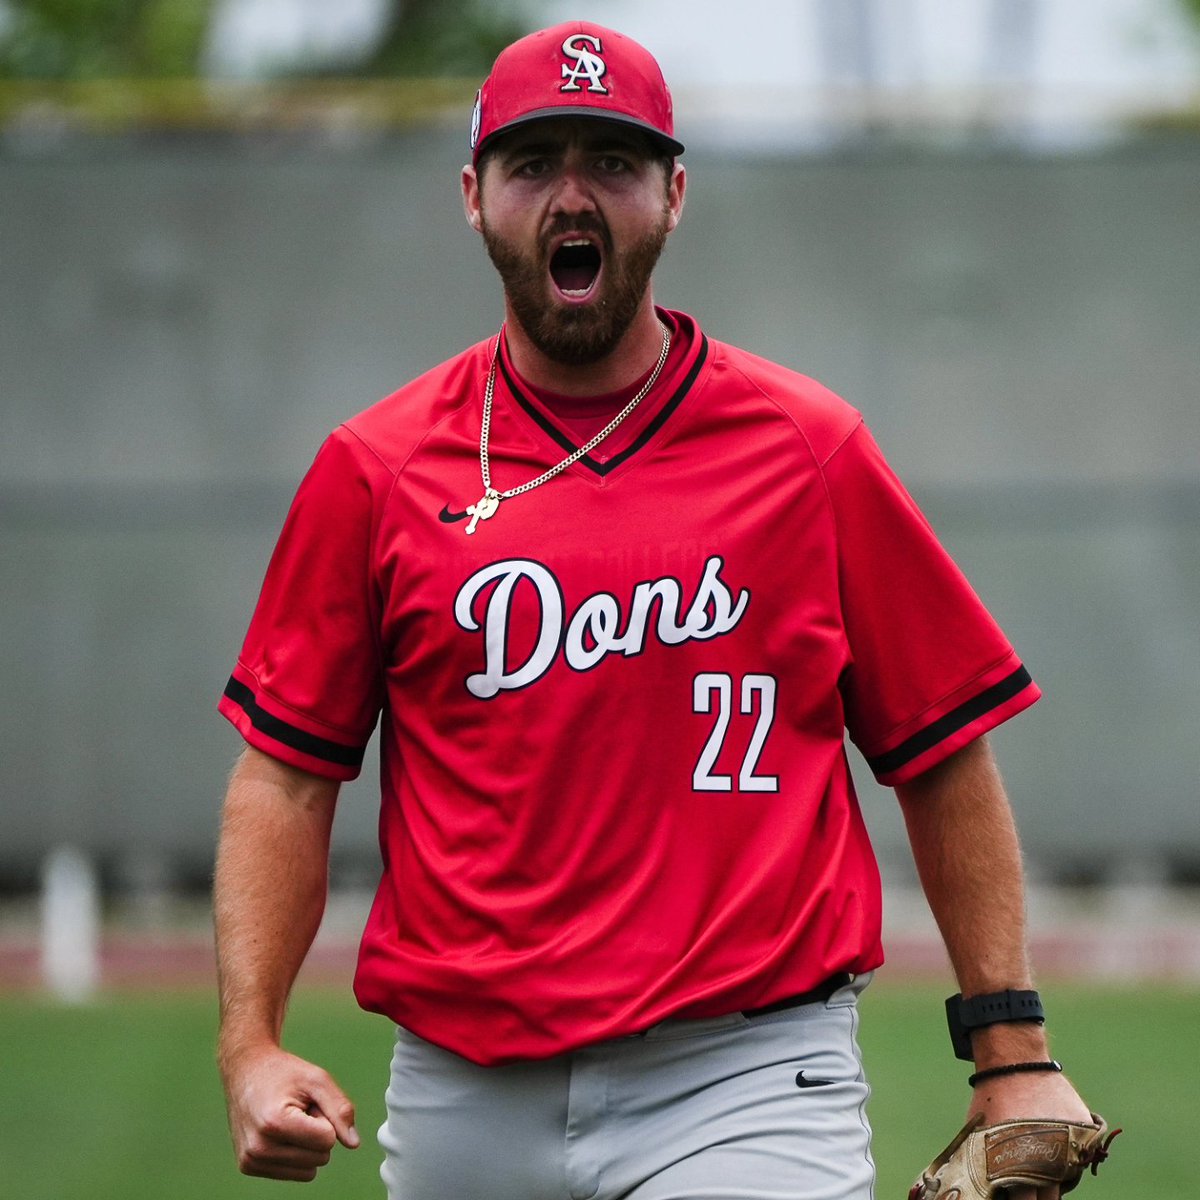 The Dons ADVANCE‼️💪😤 SAC Baseball defeated El Camino 17-7 to secure their spot in the Super Regionals. Next week, they will compete in 3 team tournament against the host No. 3 Golden West and No. 10 Santa Barbara City from May 9-11. #DonsRoll